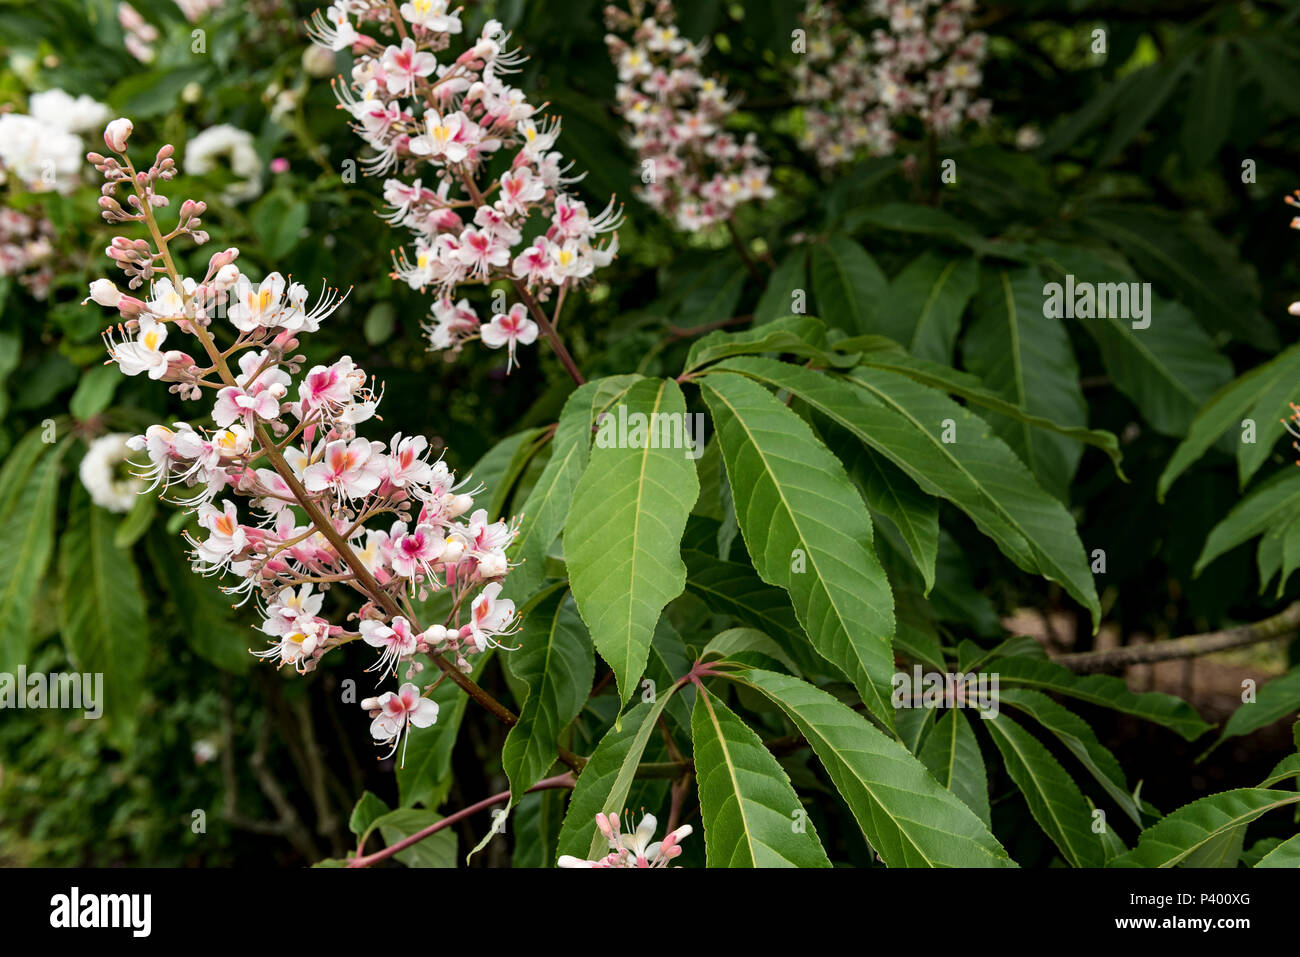 Aesculus Indica, Indian horse chestnut, Sapindaceae. Close up of flowers. Stock Photo